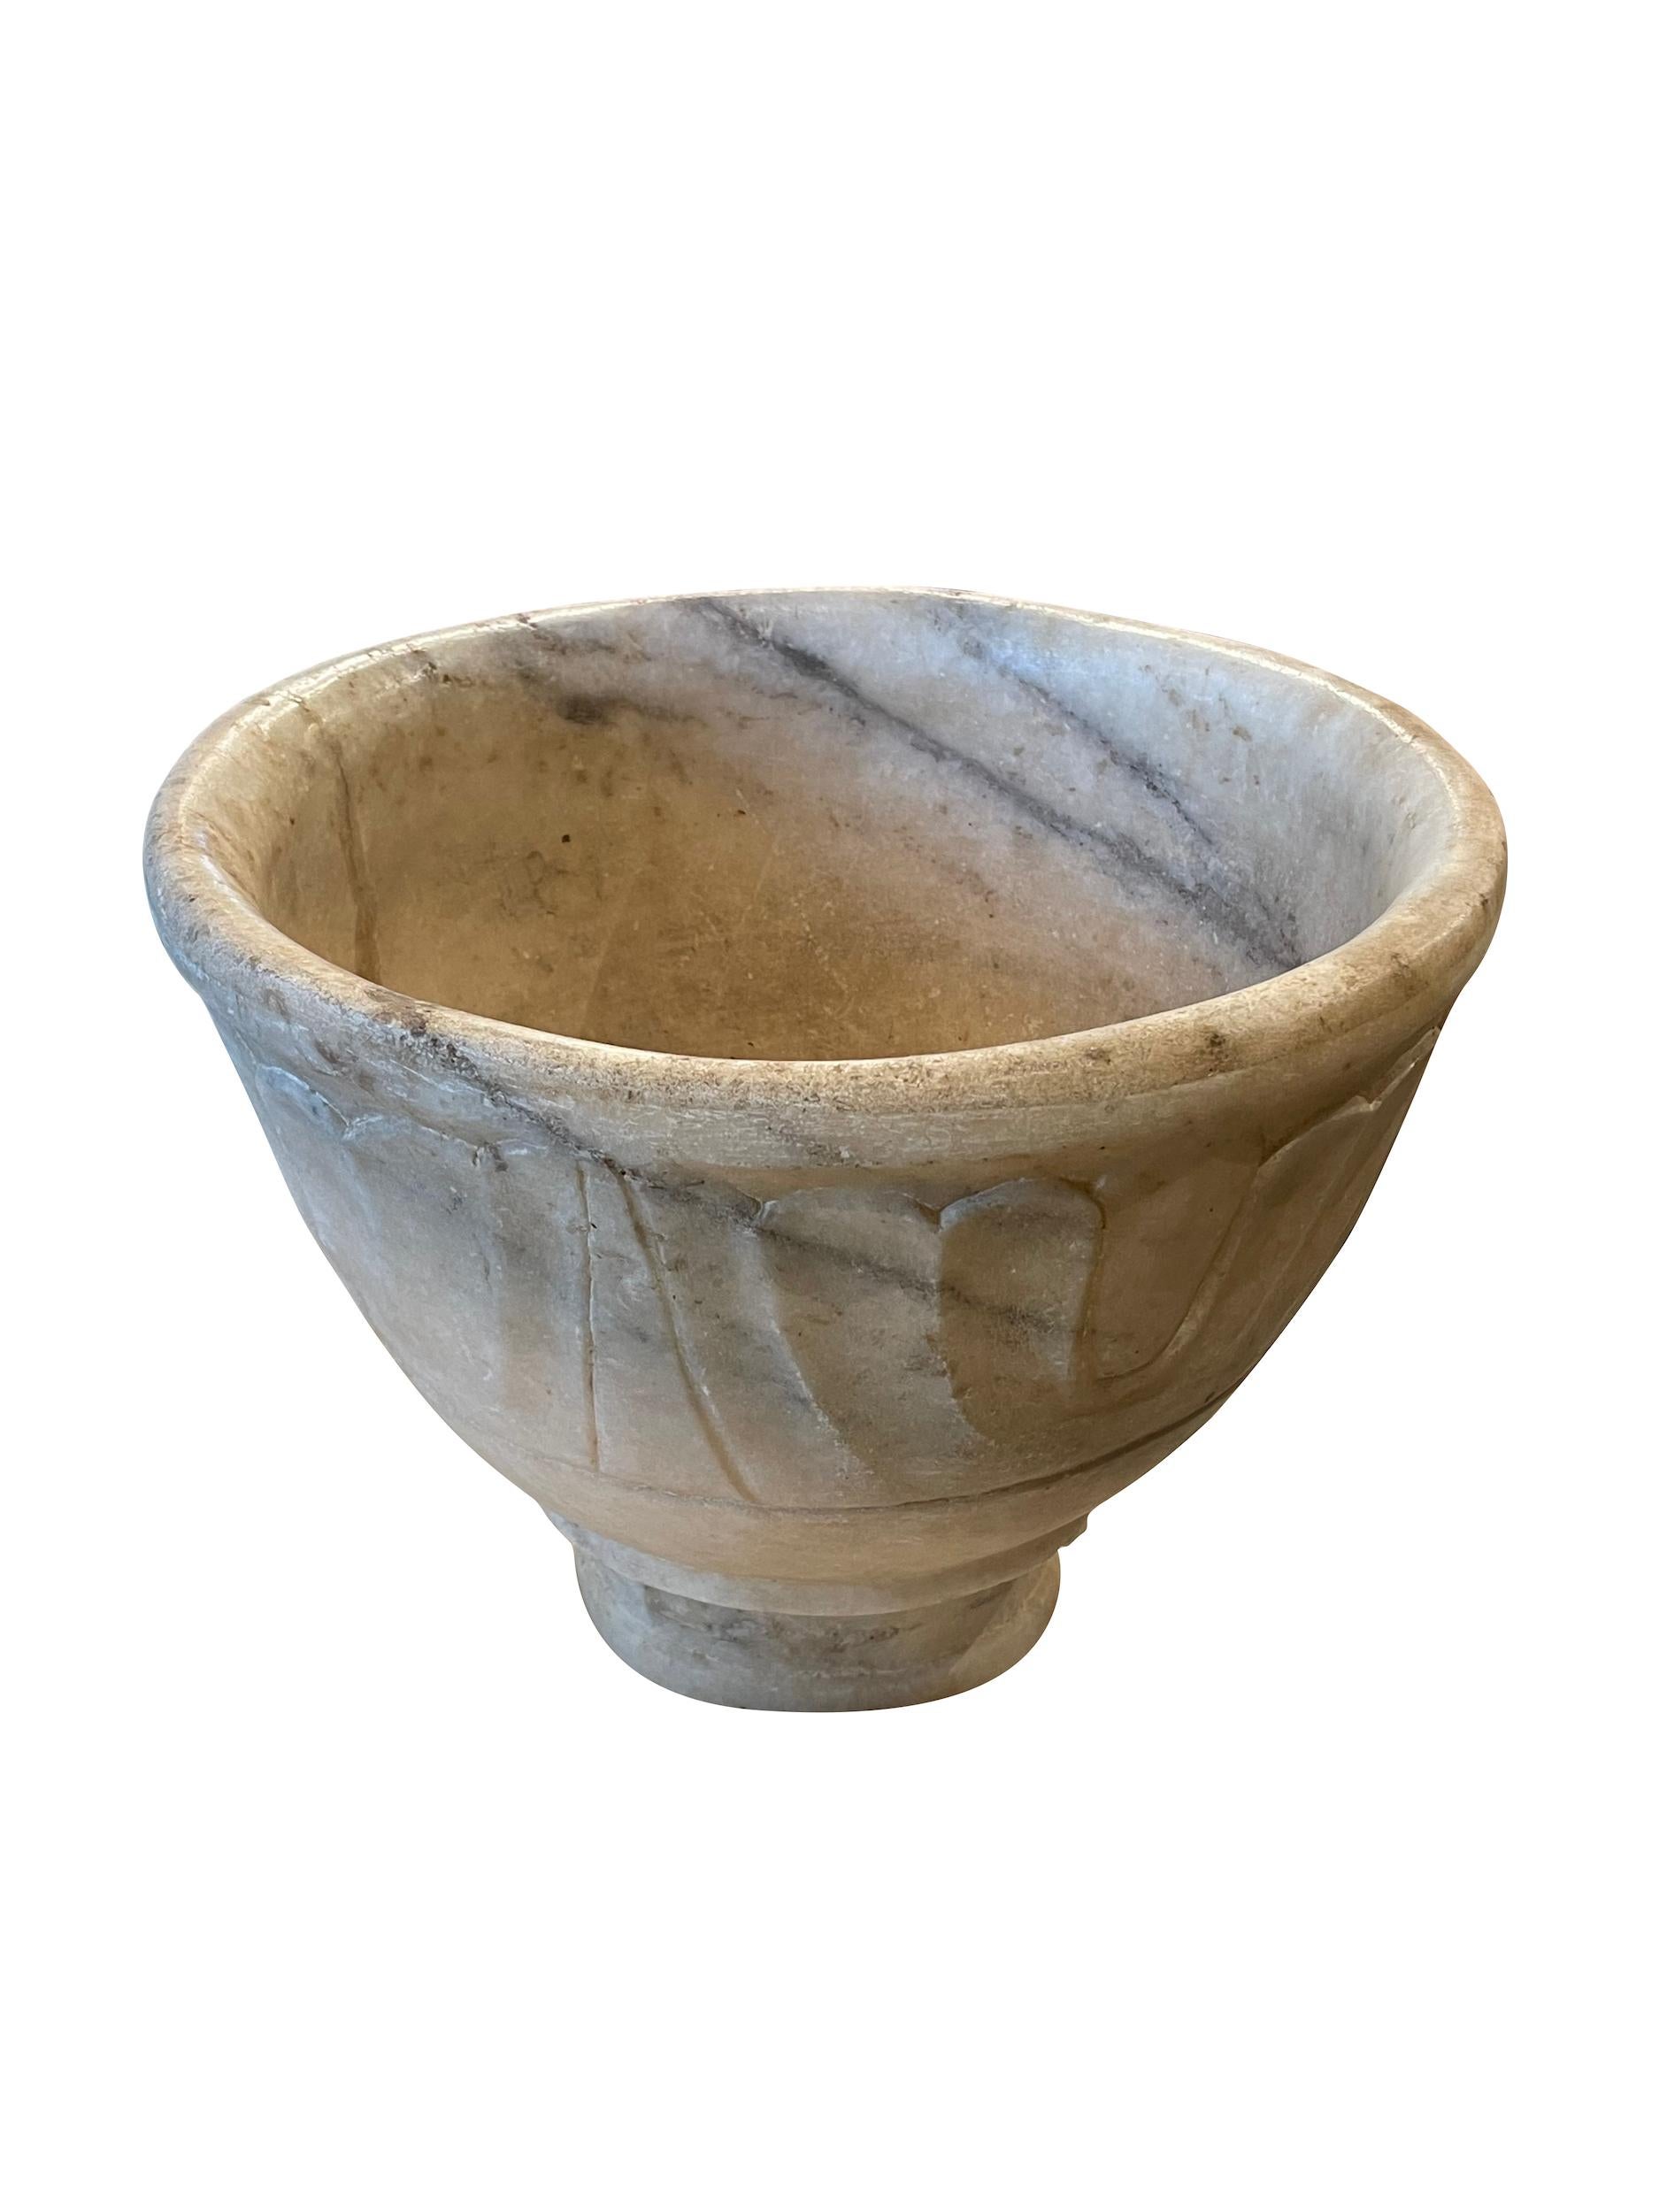 19th century Indian deep large marble bowl.
Decorative raised exterior motif.
Beautiful aged patina.
Two available and sold individually.